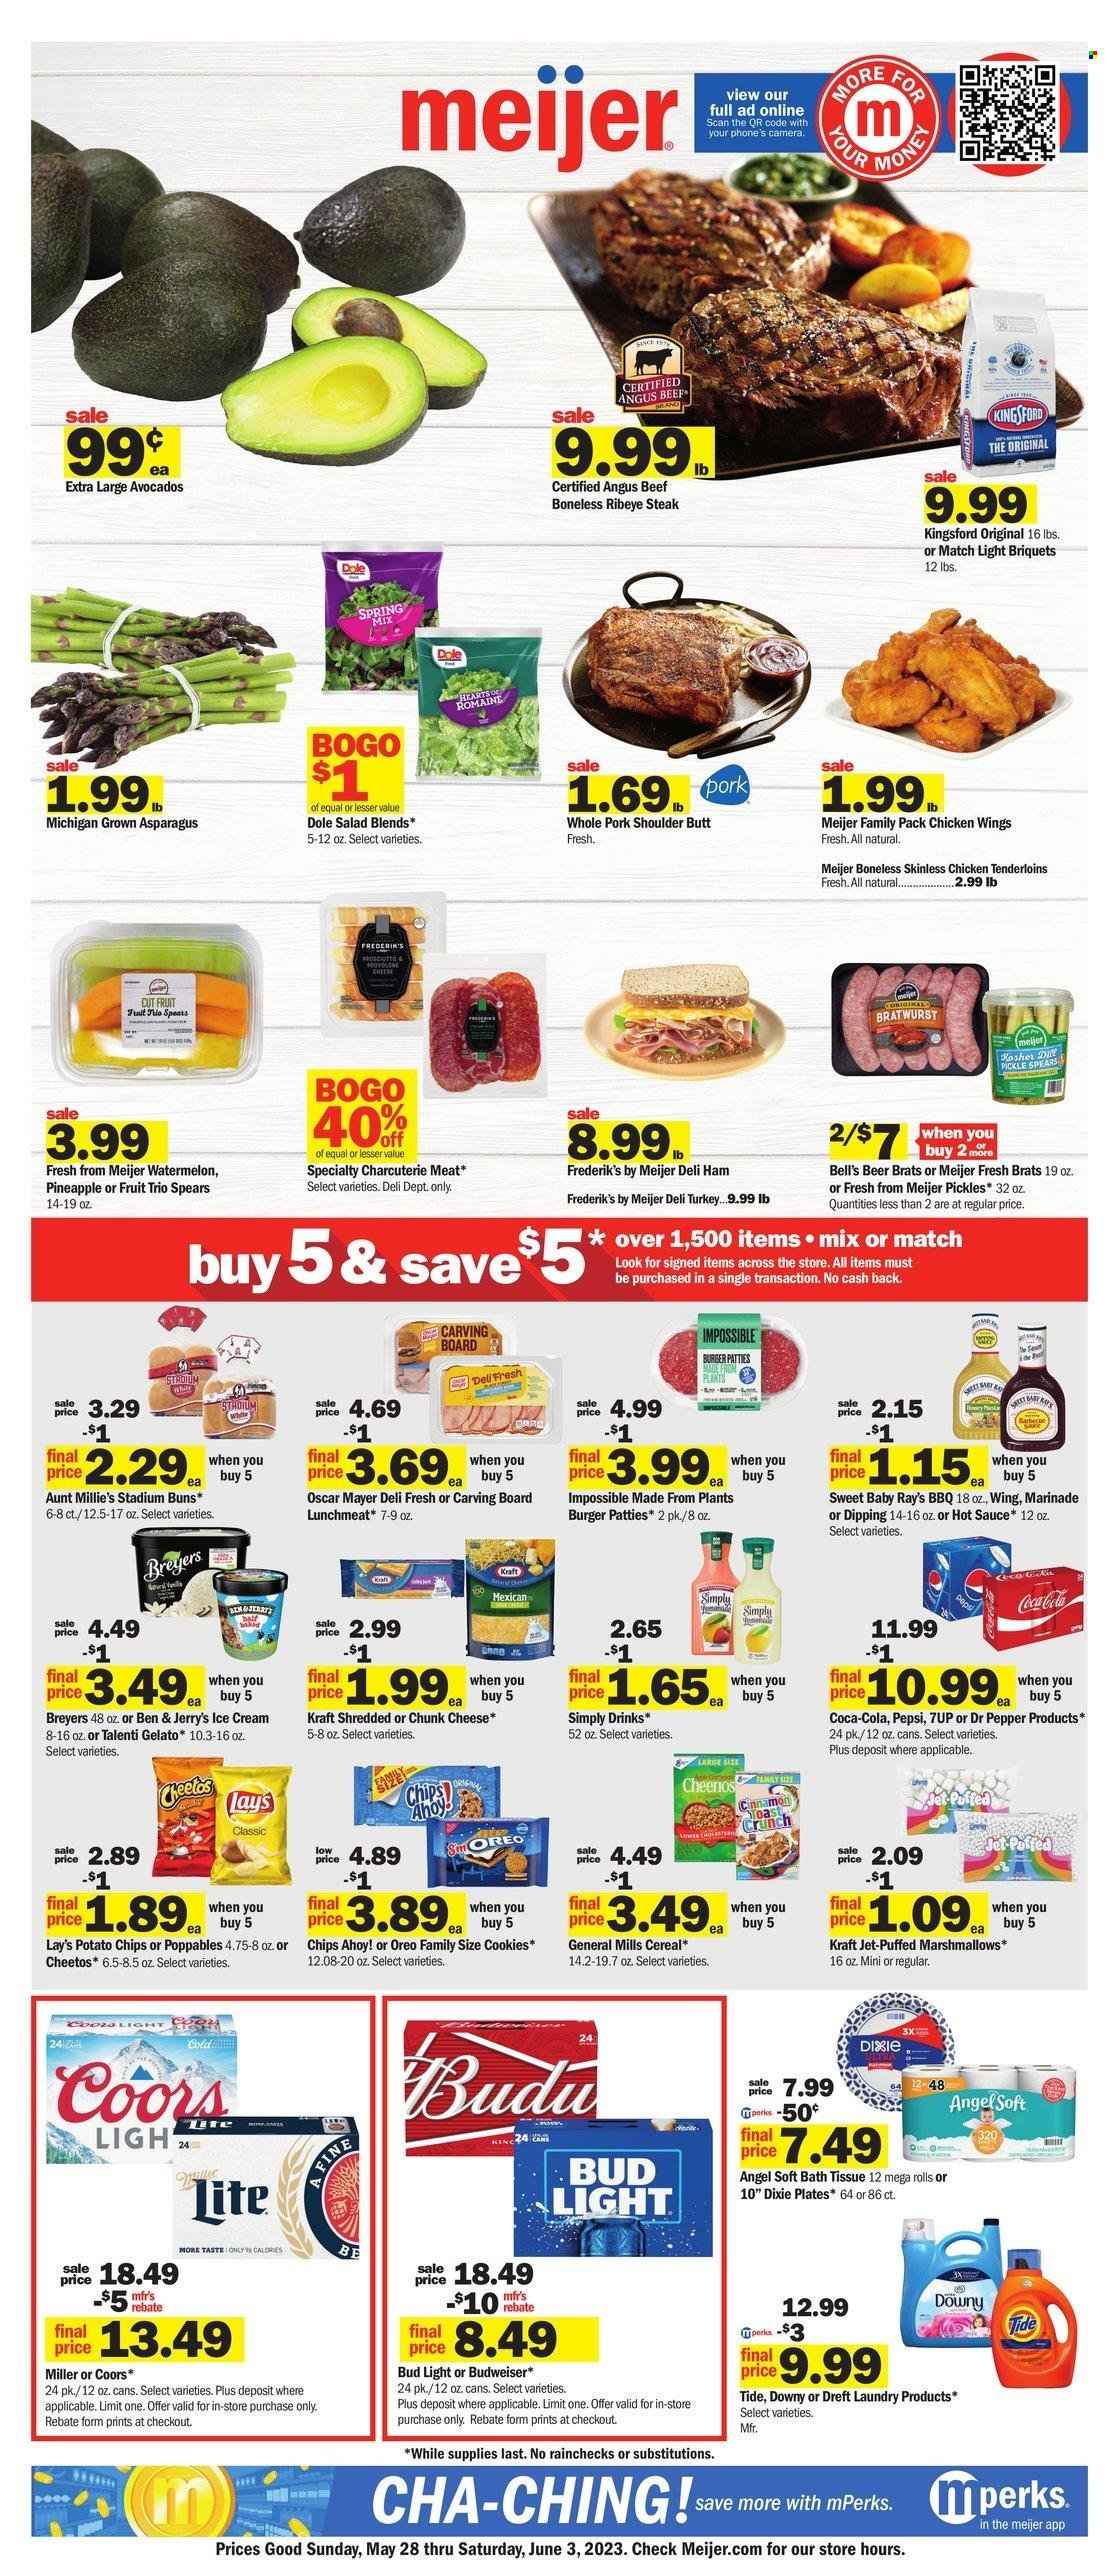 thumbnail - Meijer Flyer - 05/28/2023 - 06/03/2023 - Sales products - buns, asparagus, salad, Dole, avocado, watermelon, hamburger, sauce, Kraft®, Kingsford, ham, Oscar Mayer, bratwurst, lunch meat, shredded cheese, chunk cheese, Oreo, ice cream, Ben & Jerry's, Talenti Gelato, gelato, chicken wings, cookies, marshmallows, Chips Ahoy!, General Mills, potato chips, Cheetos, Lay’s, salty snack, pickles, cereals, Cheerios, cinnamon, hot sauce, marinade, Coca-Cola, Pepsi, Dr. Pepper, soft drink, 7UP, alcohol, beer, Bud Light, Bell's, beef meat, beef steak, steak, ribeye steak, burger patties, pork meat, pork shoulder, bath tissue, Tide, Jet, plate, Dixie, briquettes, Budweiser, Coors, chicken, pineapple, sliced fruit, plant based ready meal, cheese, chips, Miller, paper plate. Page 1.